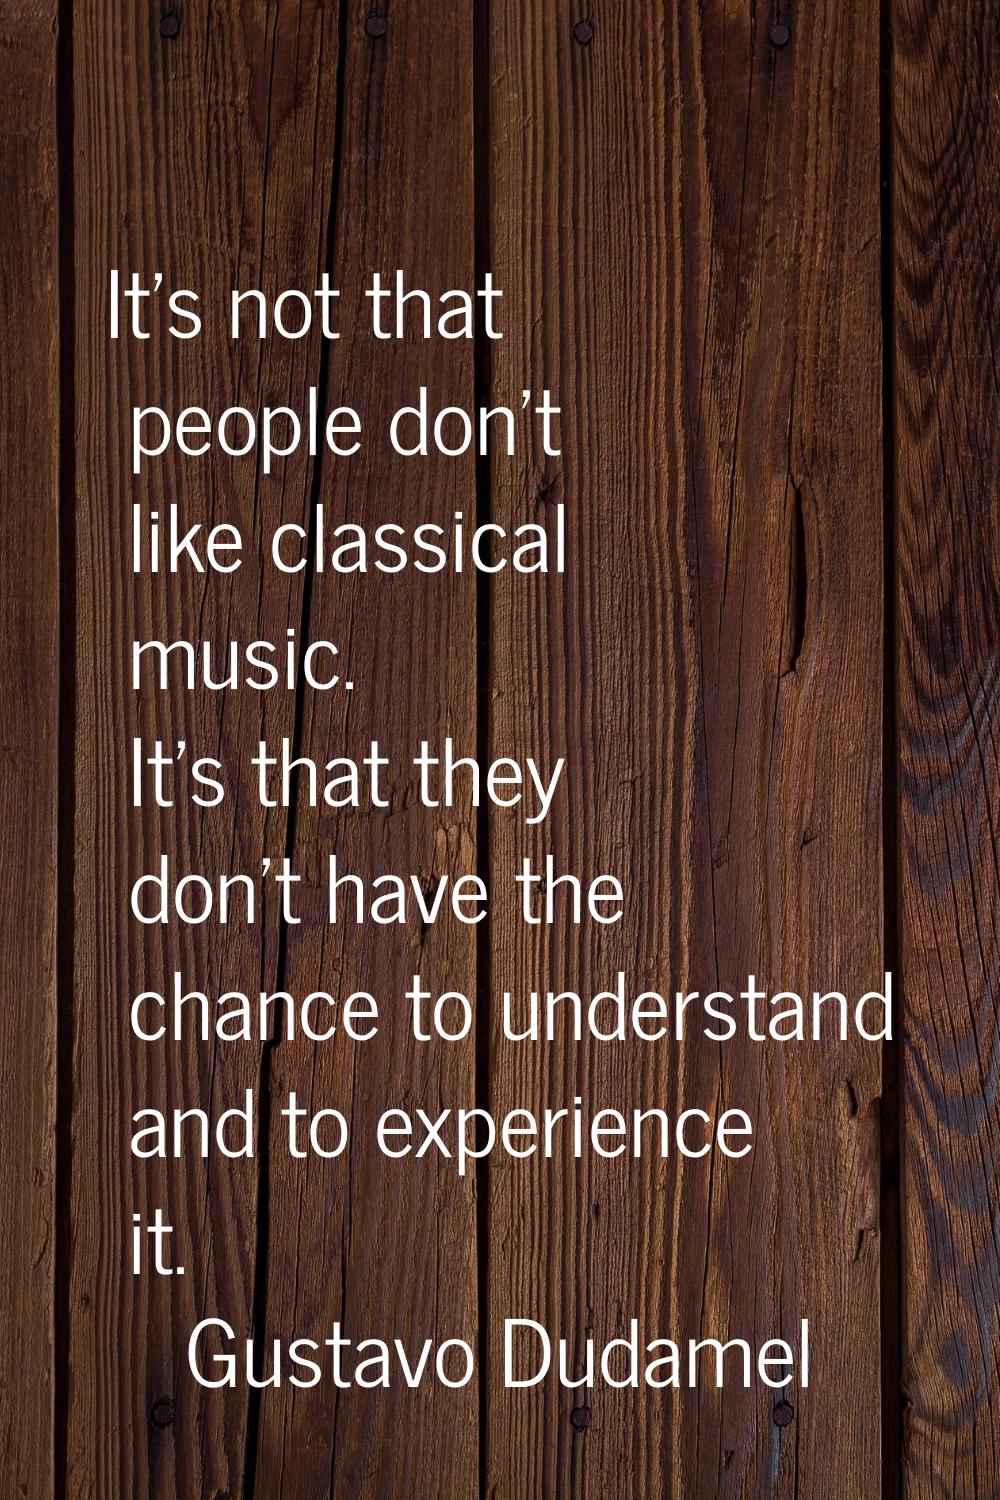 It's not that people don't like classical music. It's that they don't have the chance to understand